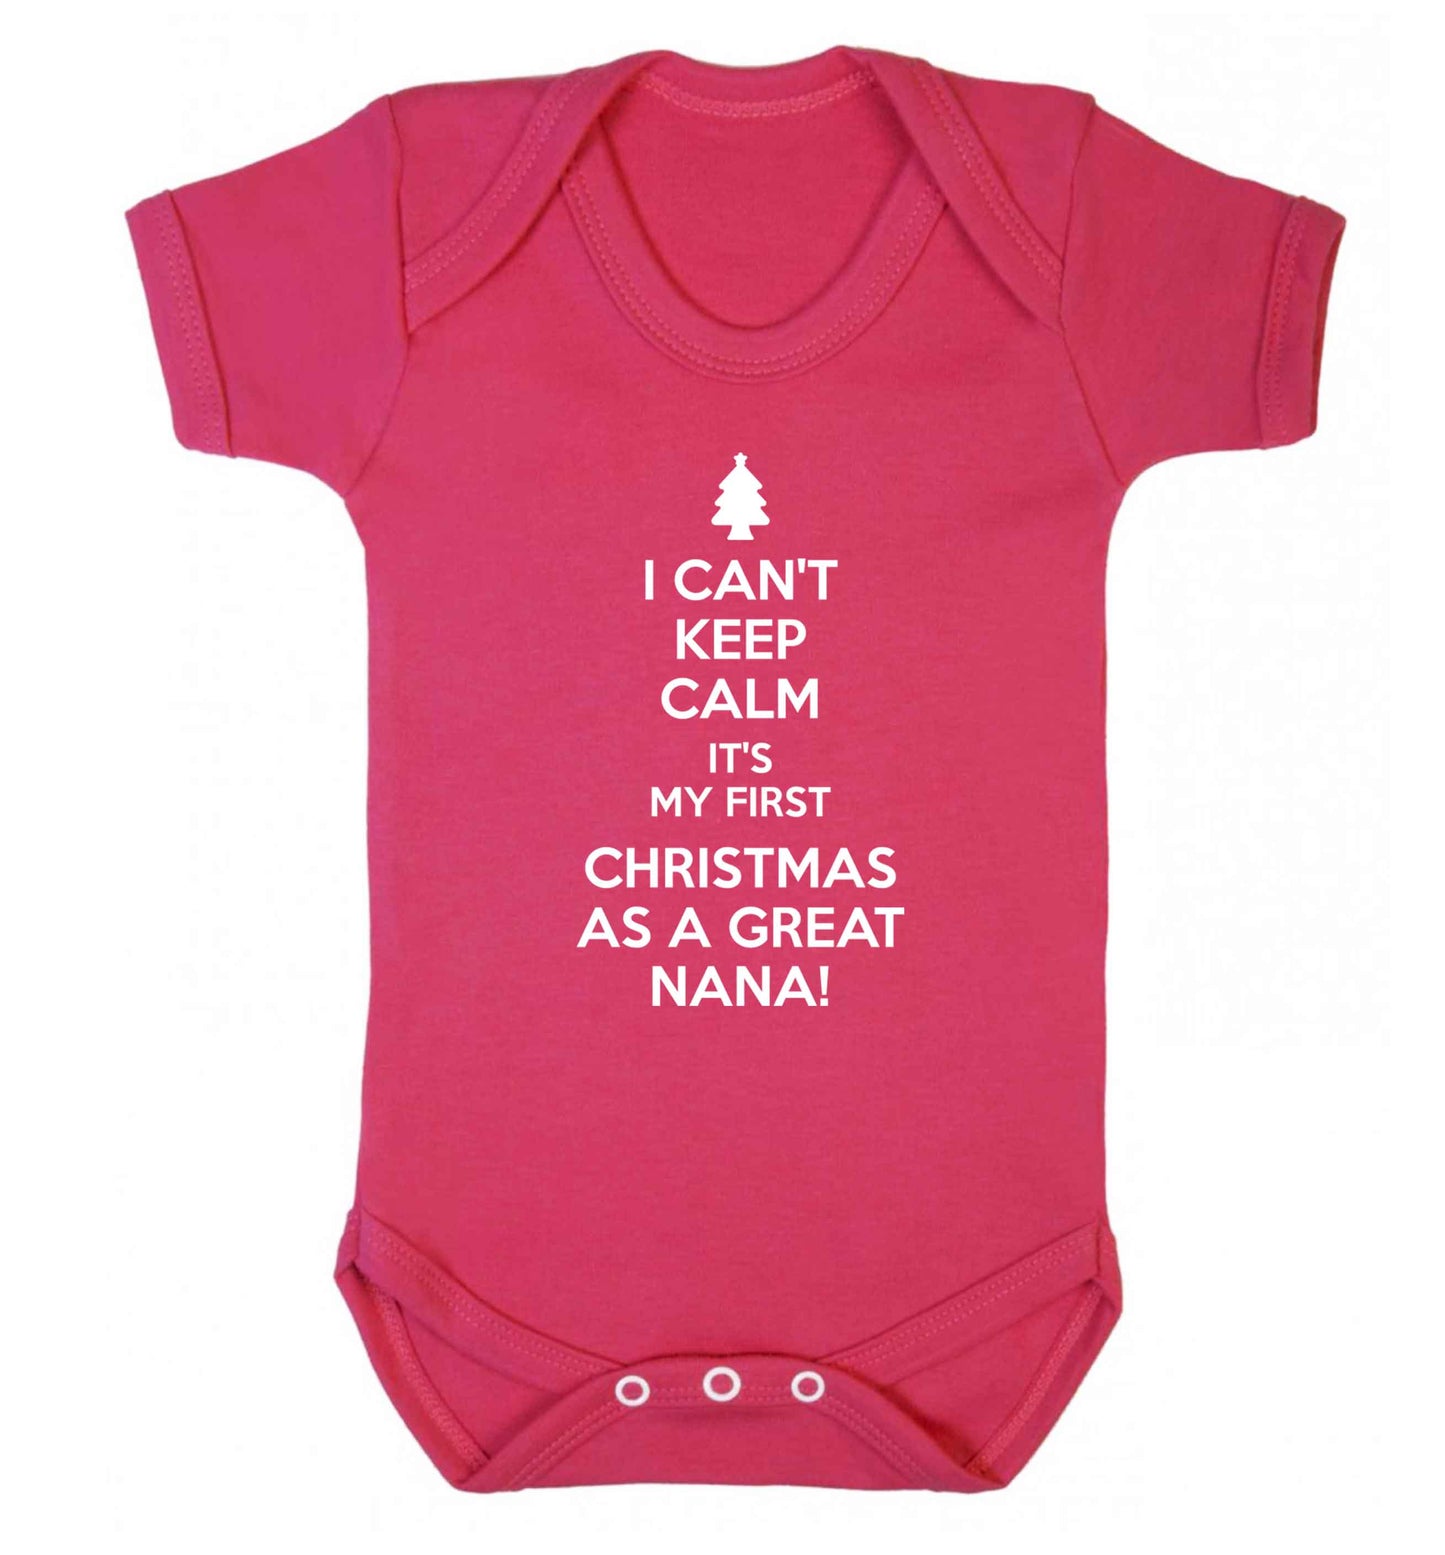 I can't keep calm it's my first Christmas as a great nana! Baby Vest dark pink 18-24 months